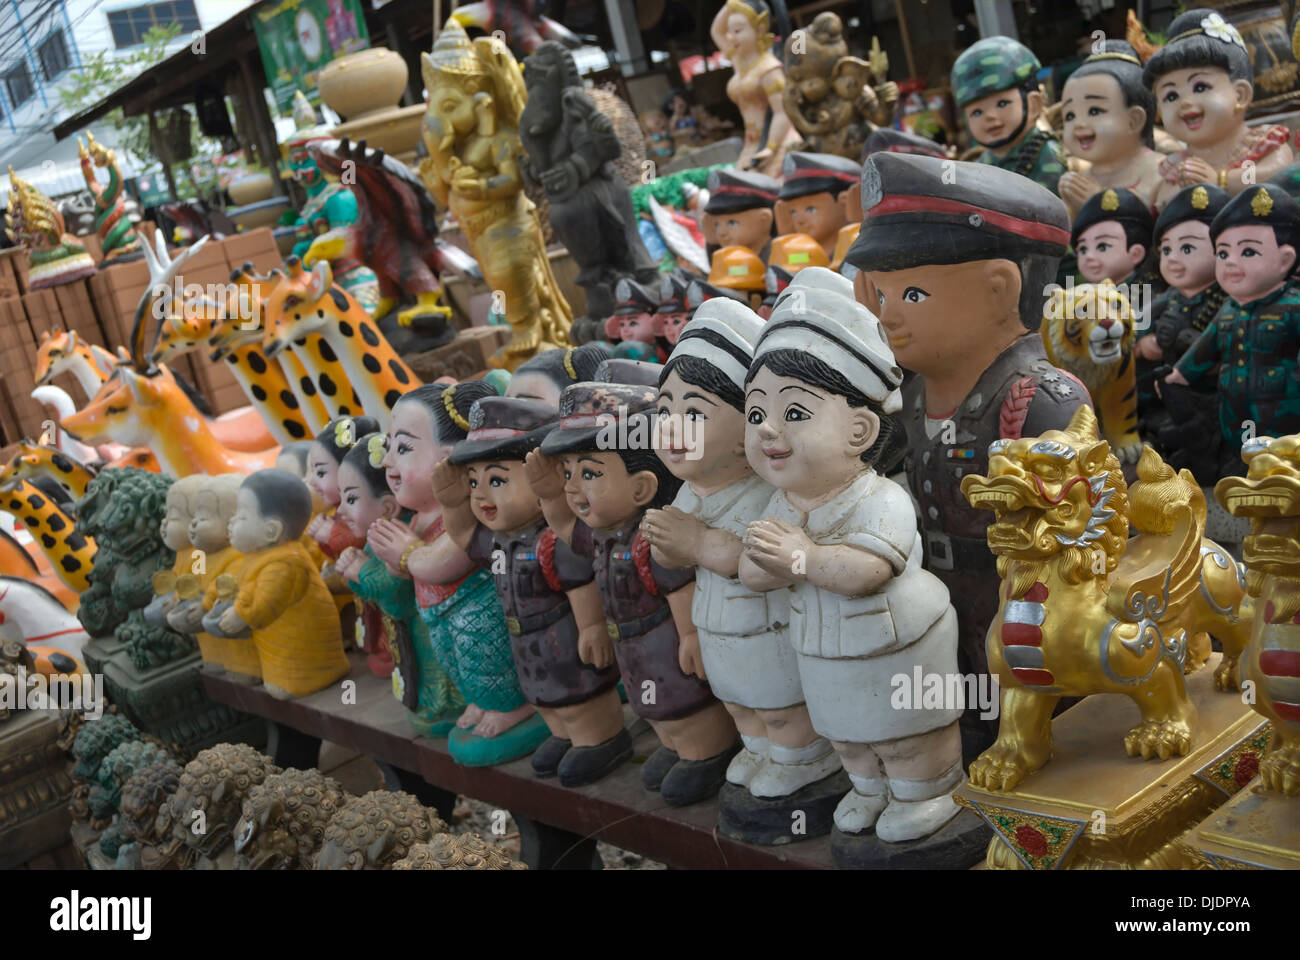 soldiers and nurses among the figures being sold as garden ornaments in a shop in phetchabun, thailand Stock Photo